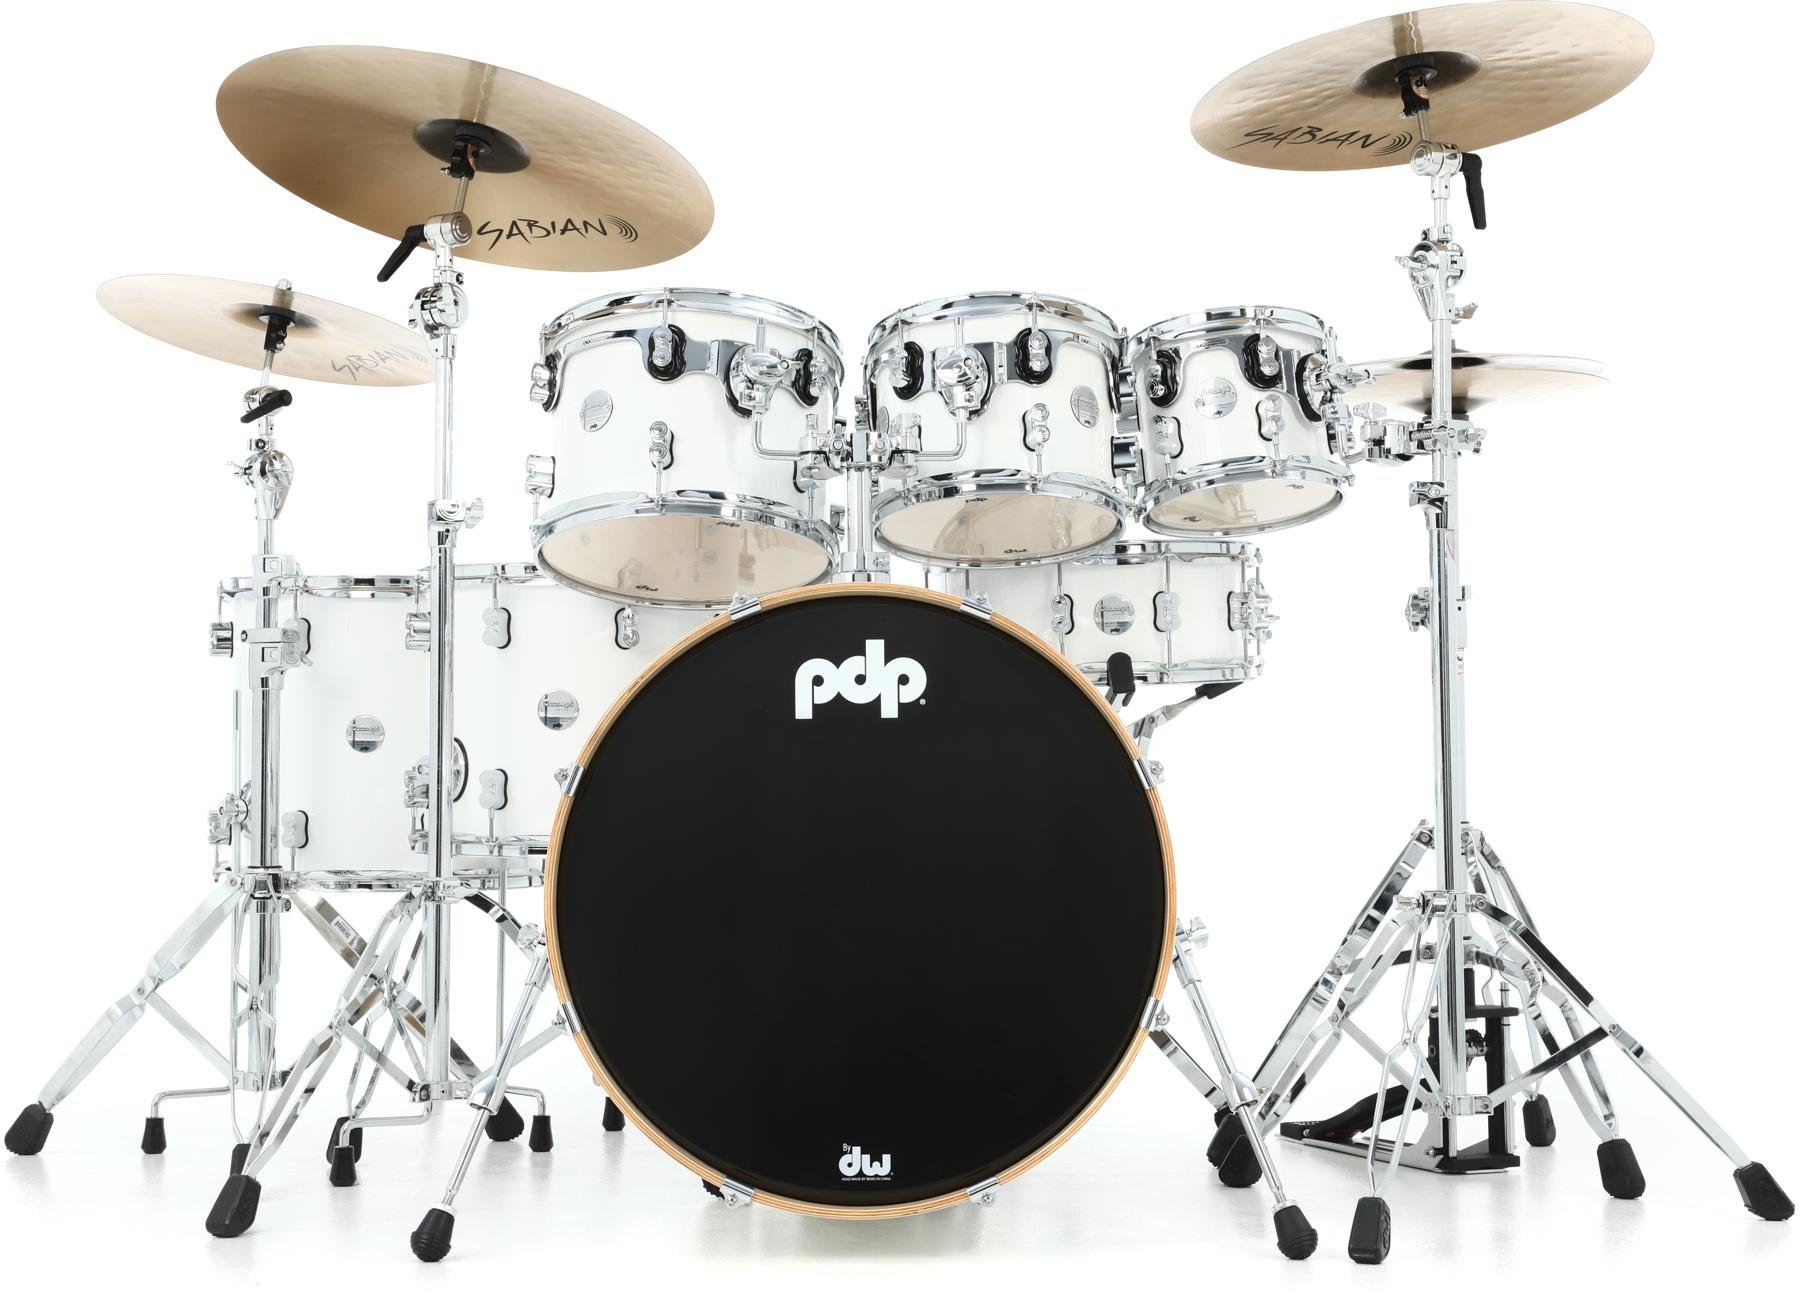 pdp by dw encore 5-piece drum kit with hardware and cymbals